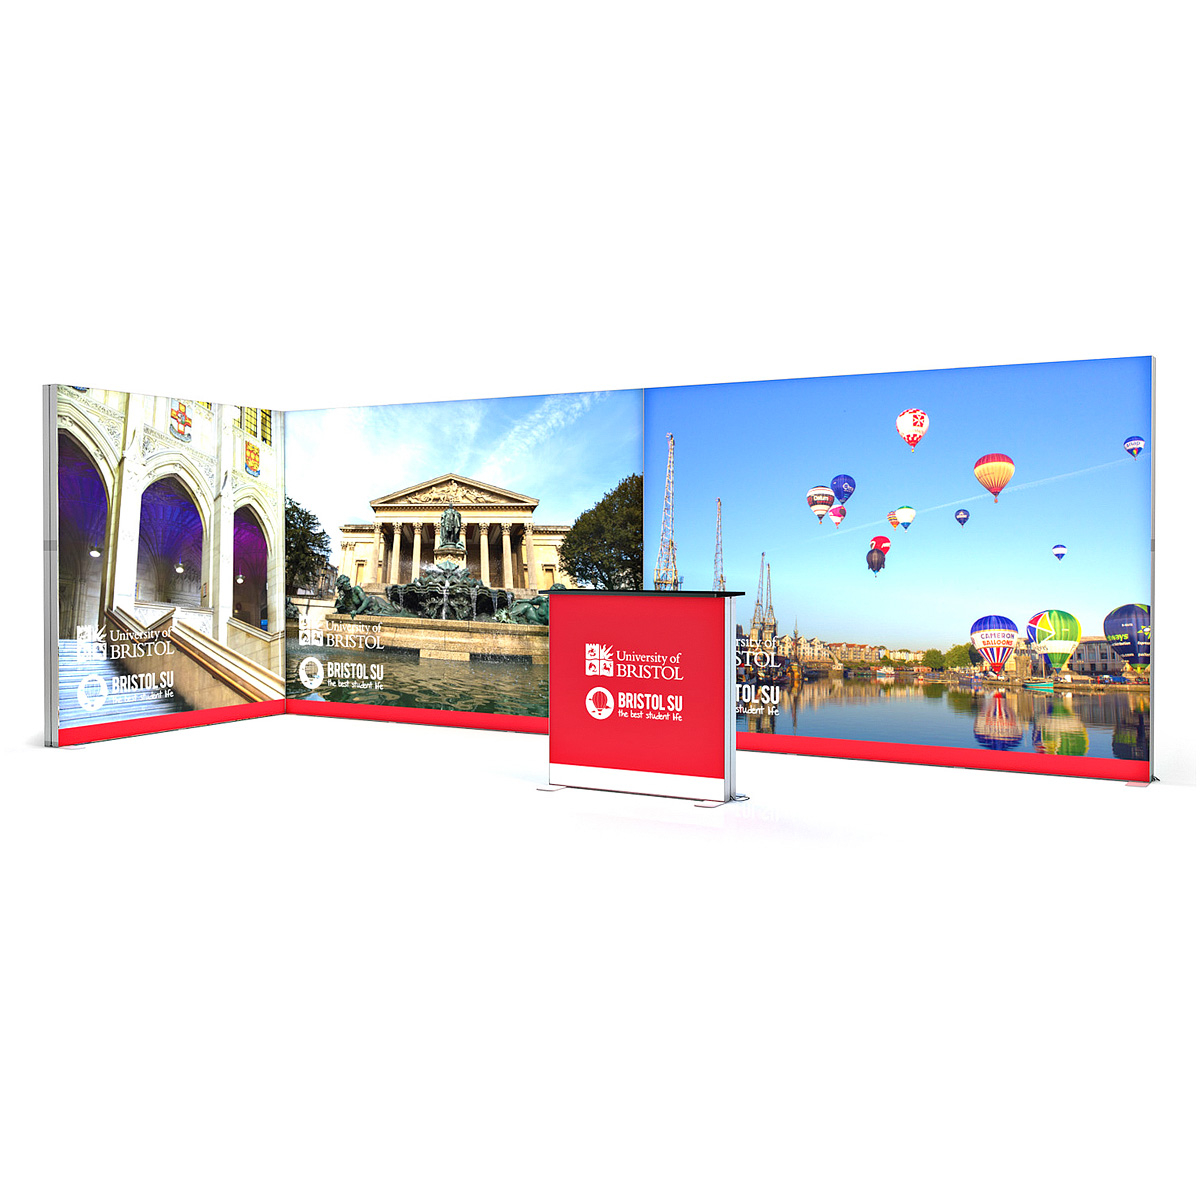 FABRILUX<sup>®</sup> 6x2 LED Lightbox Fabric Exhibition Stands Kit 27